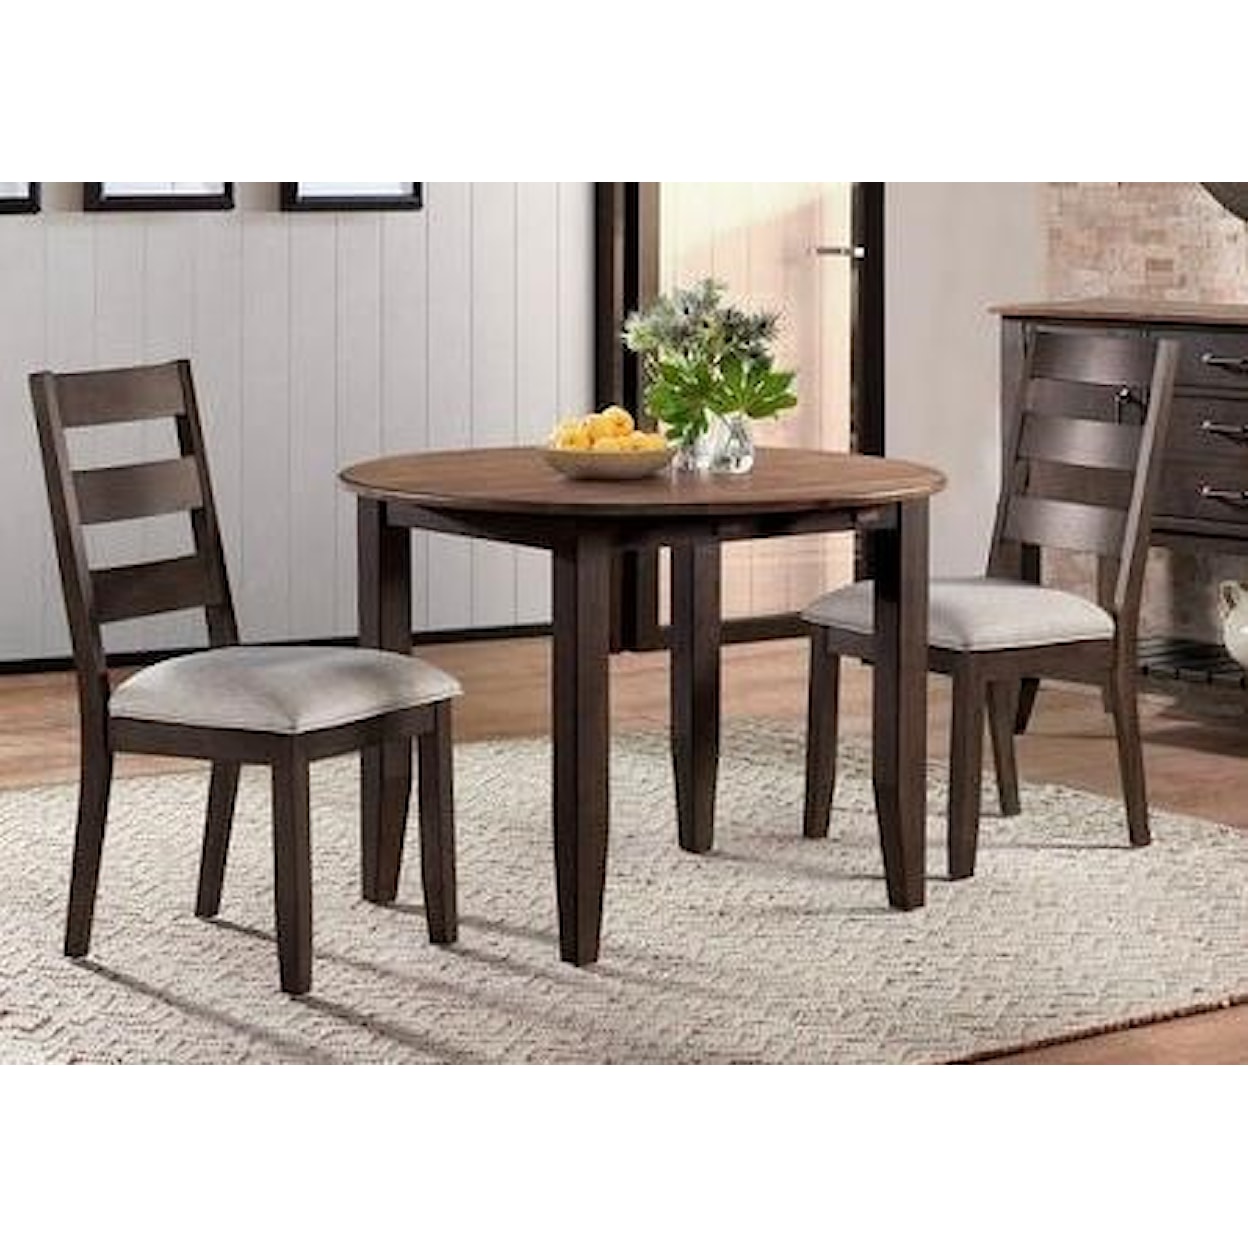 VFM Signature Beacon 3-Piece Table and Chair Set